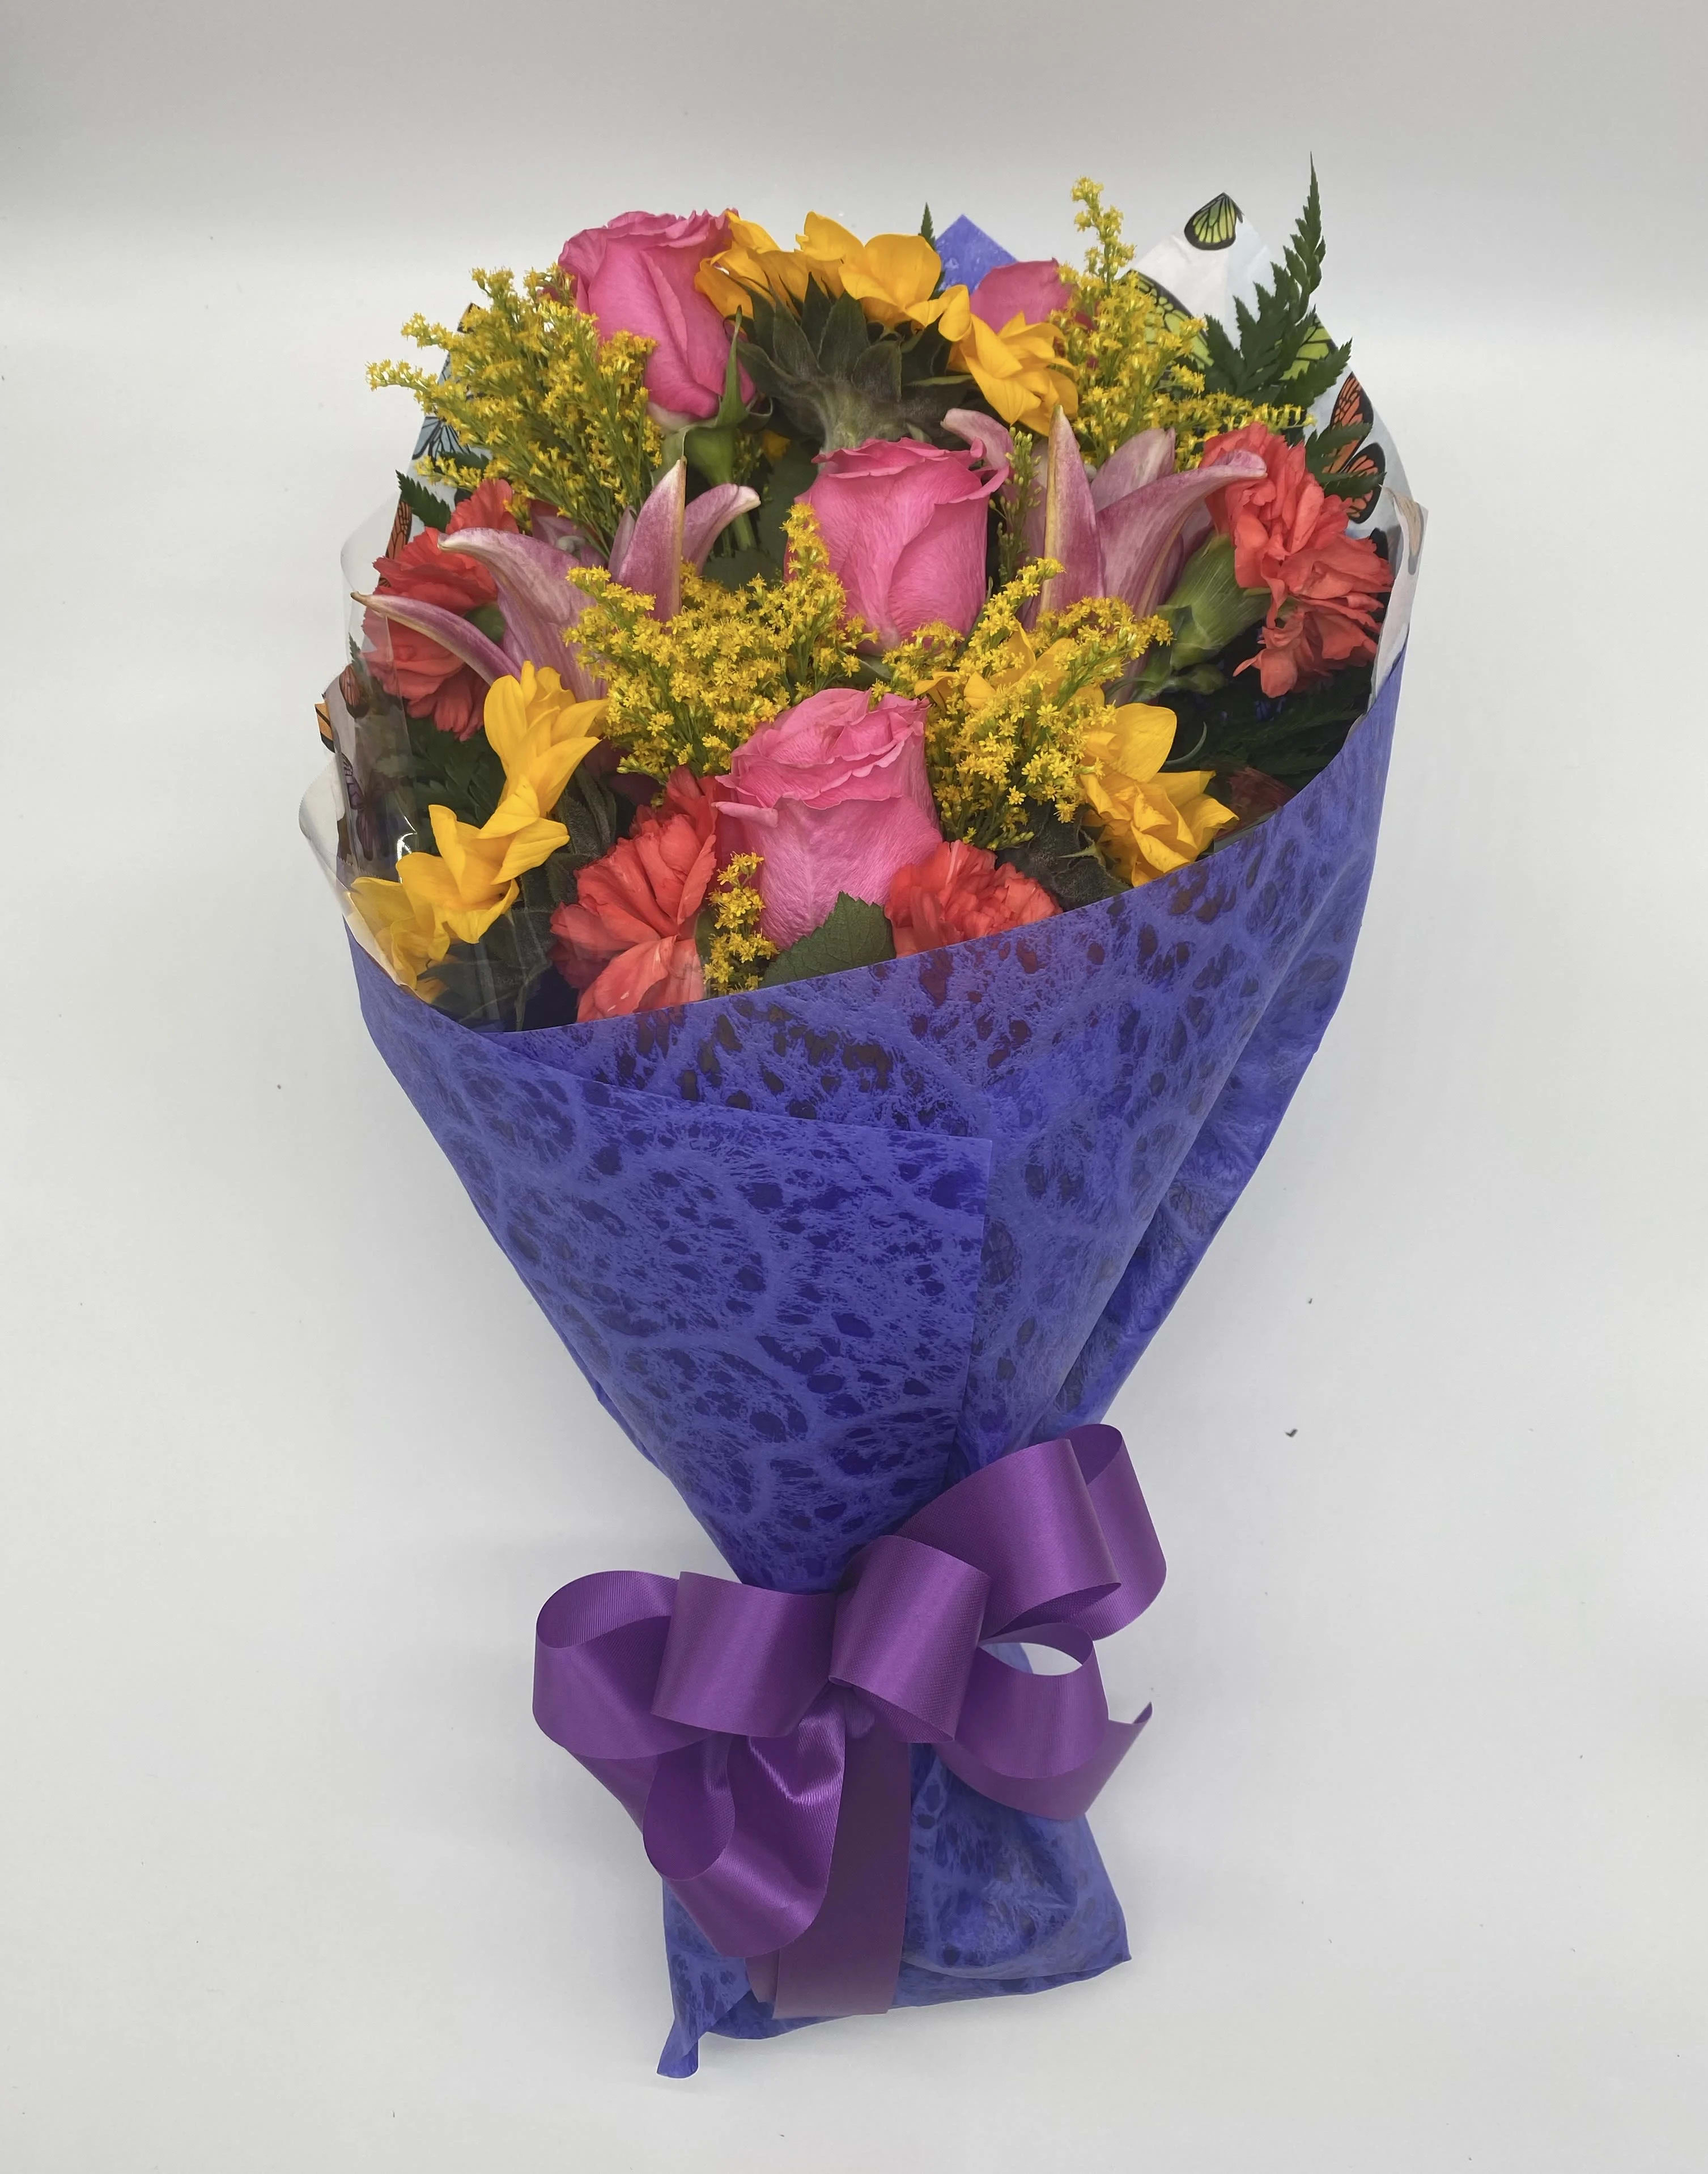 Dazzling Days Wrapped Bouquet - Dazzling Days  Wrapped Bouquet includes lilies, roses, sunflowers and other fresh bold flowers. Our loose bunches do NOT include vases. Paper and bow color will vary.